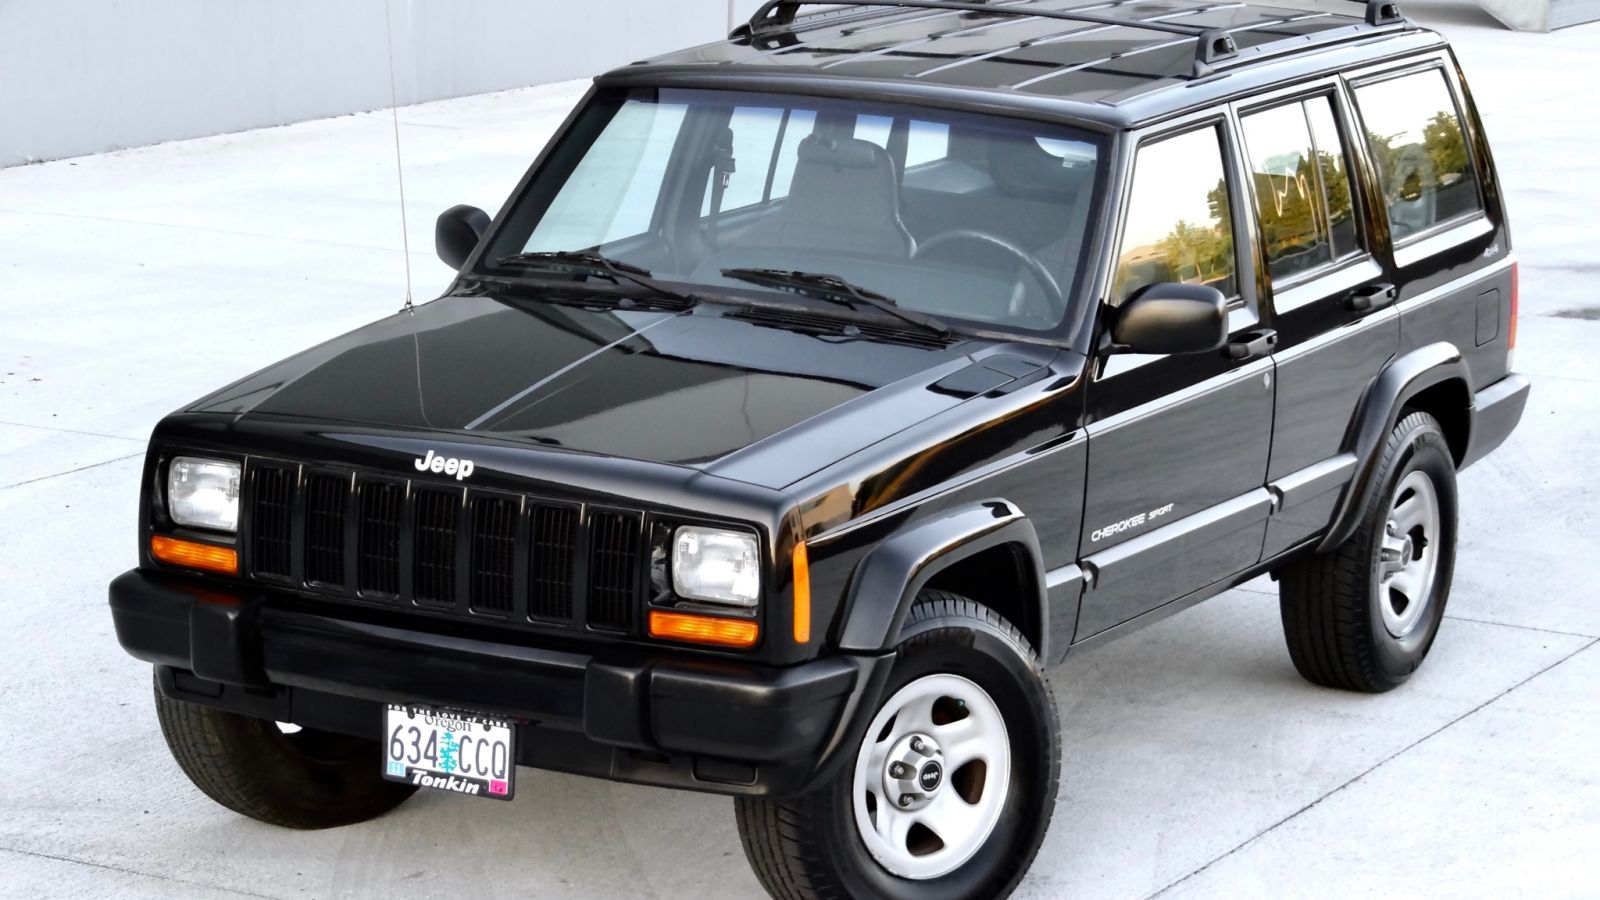 Illustration for article titled Guess The Final Price: 2001 Cherokee XJ 4wd 59k Miles - Update! It sold for...